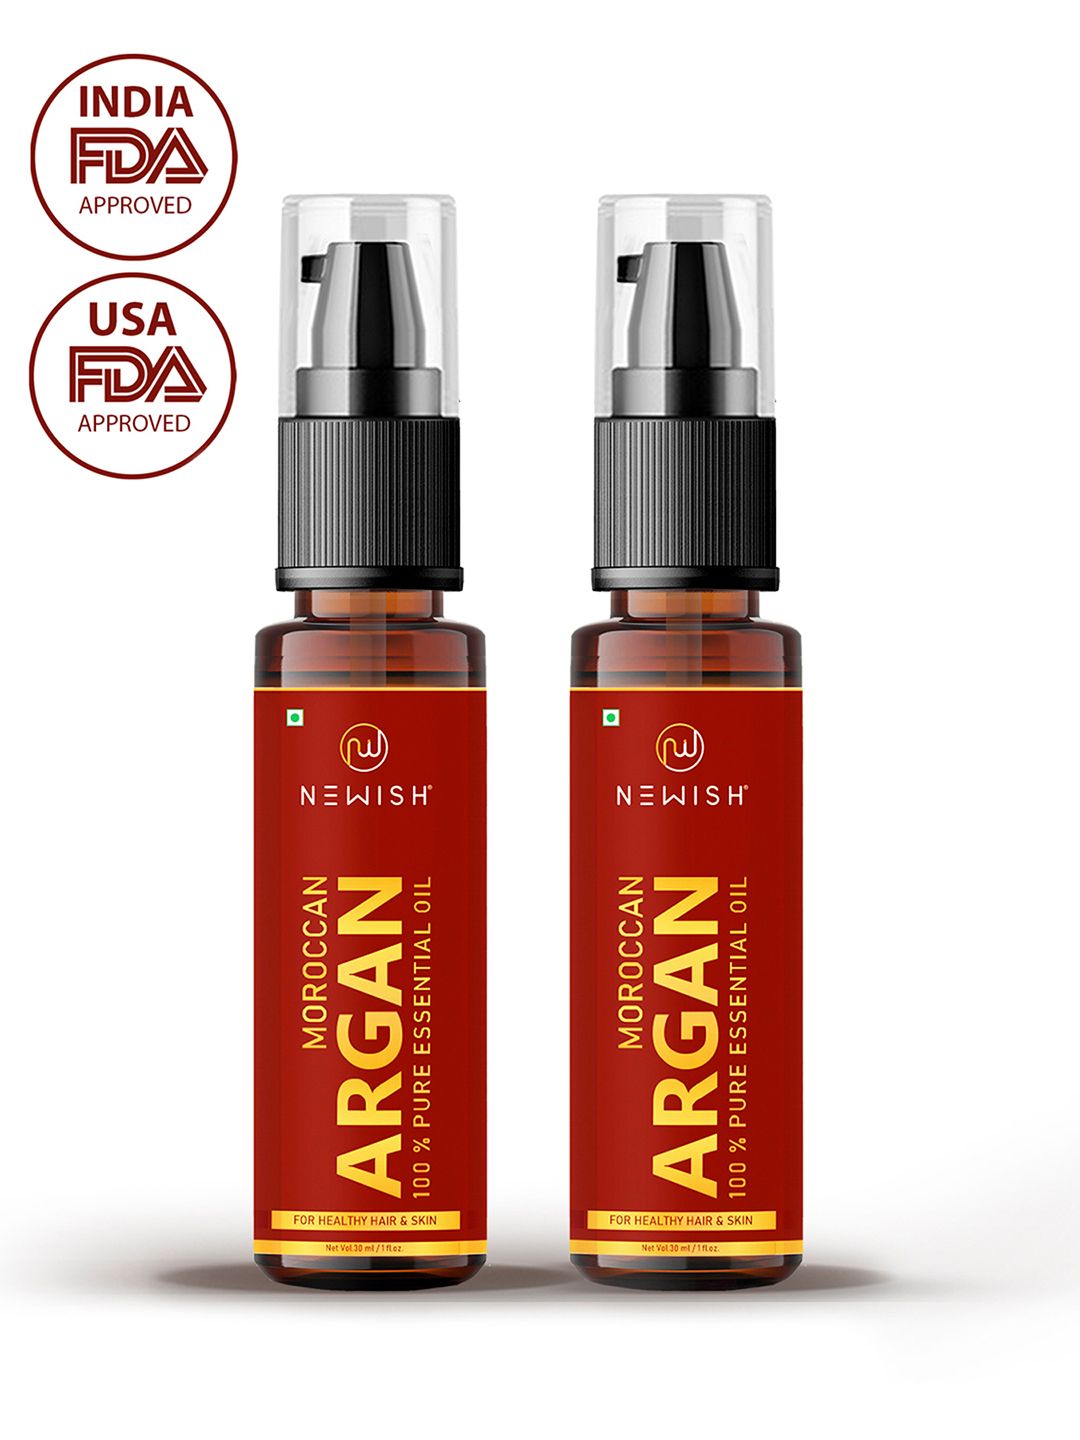 NEWISH Set of 2 Moroccan Argan Oil for Hair & Face Price in India